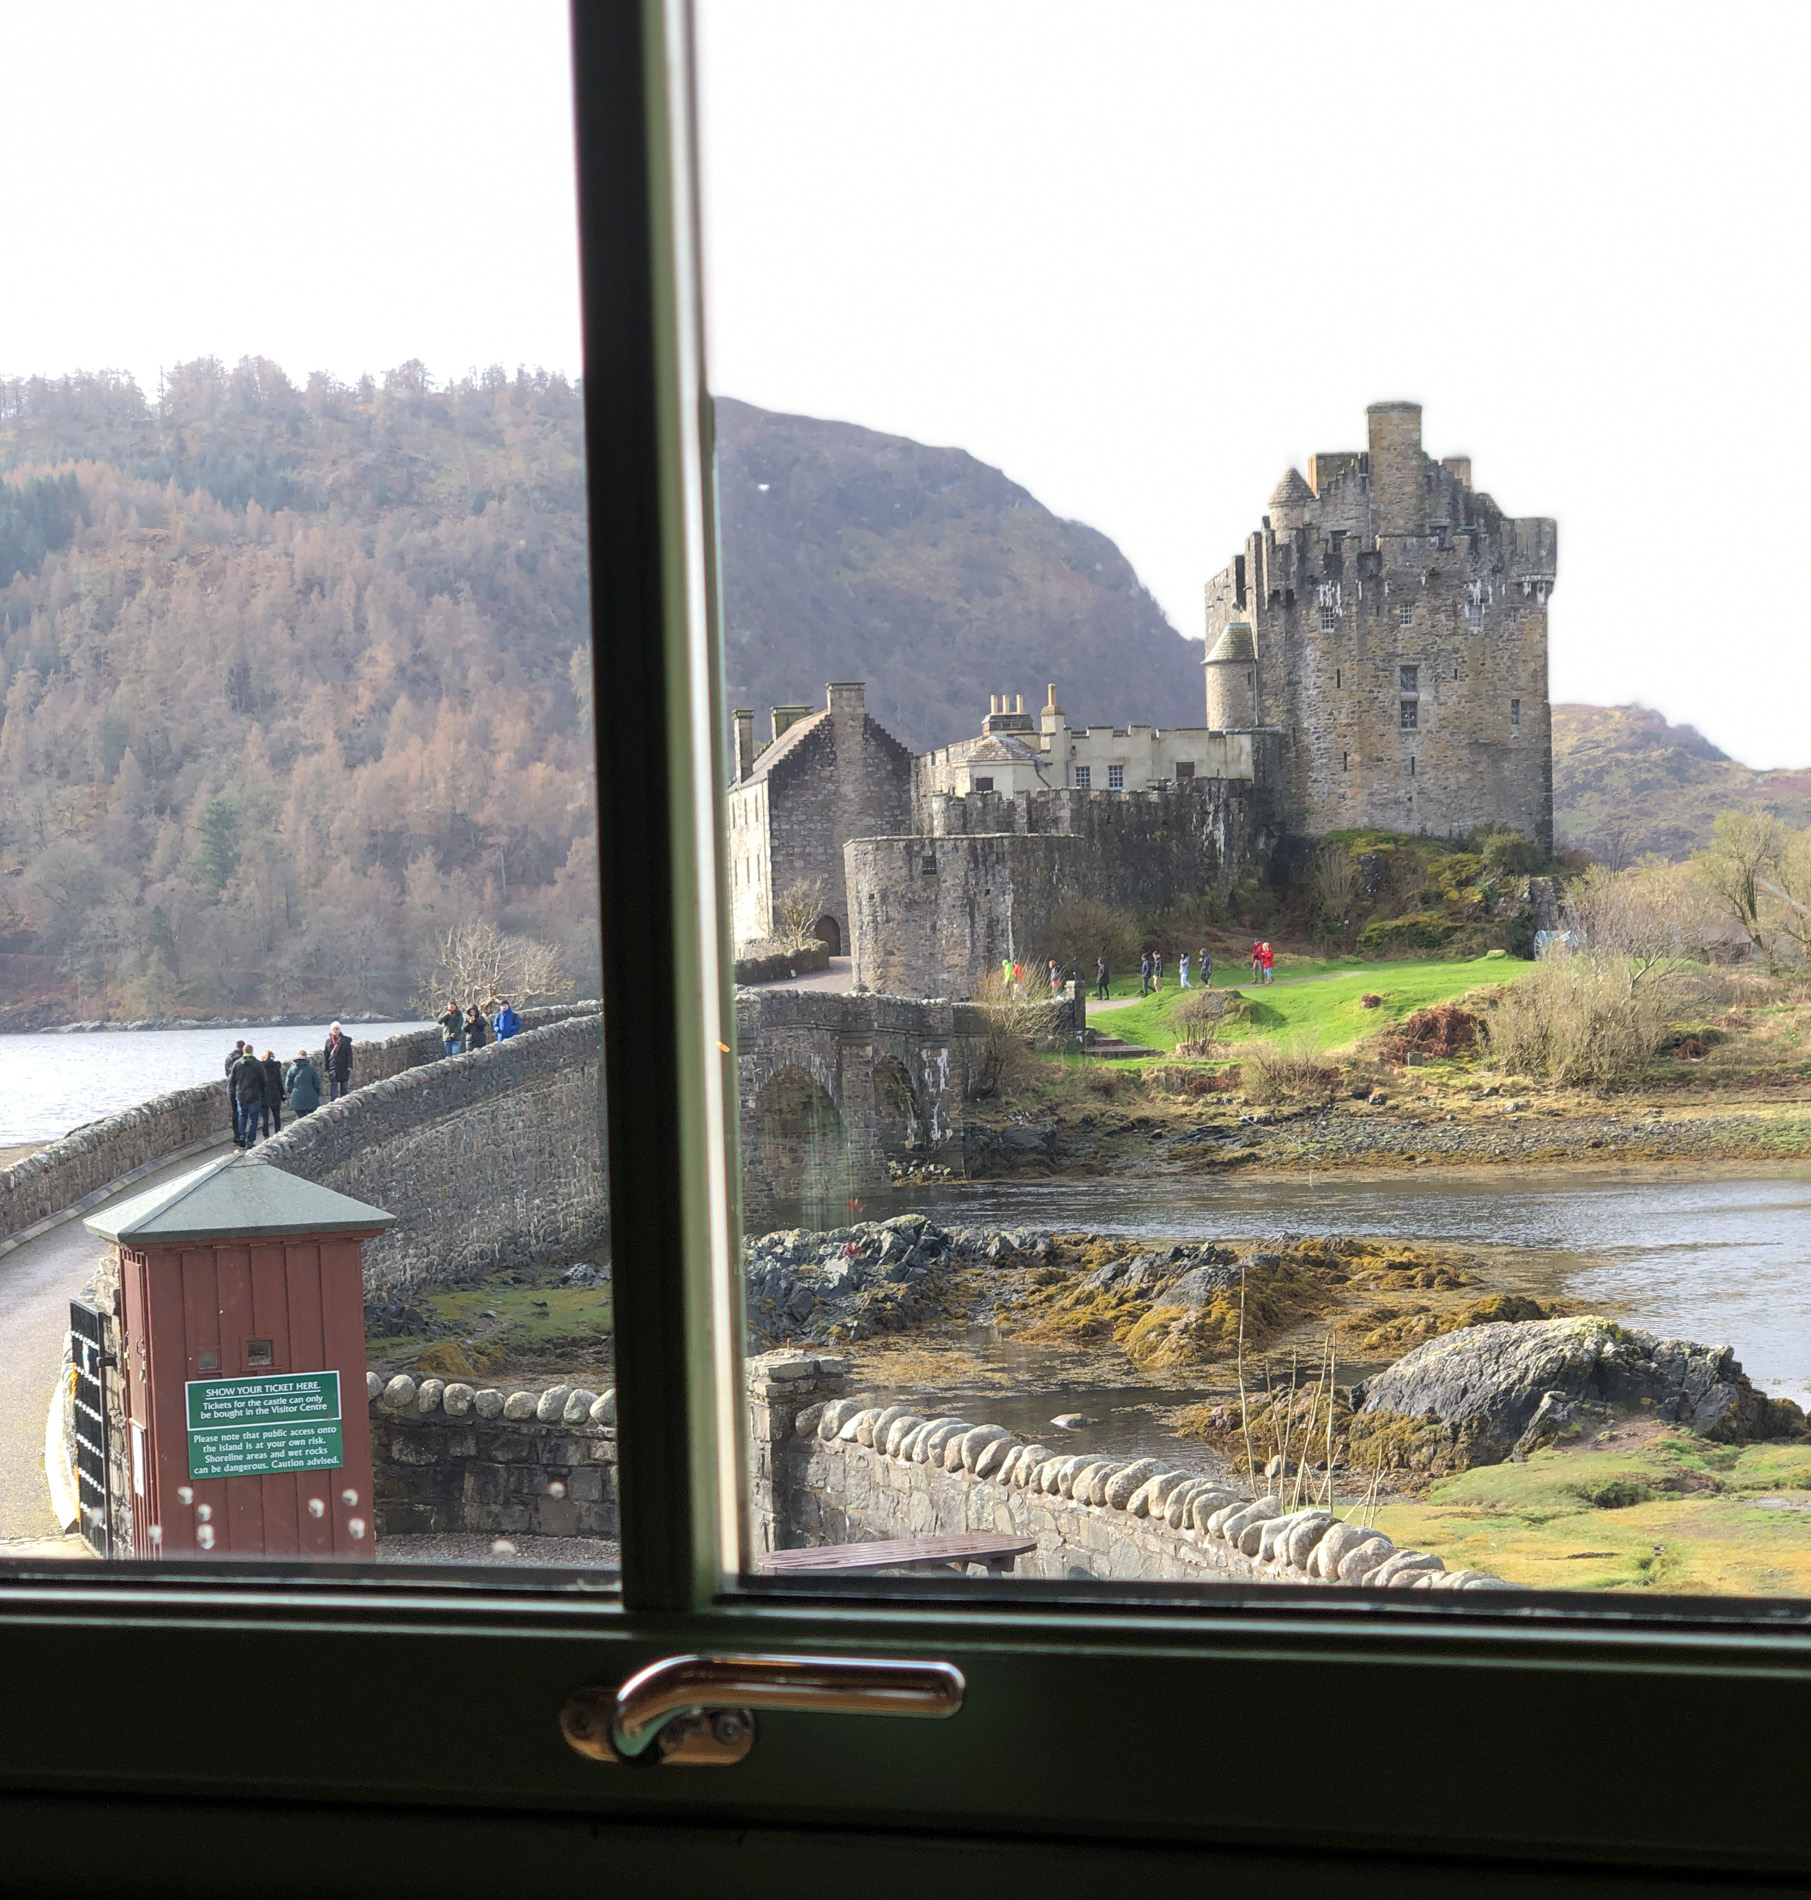 The view from the restaurant at Eilean Donan Castle